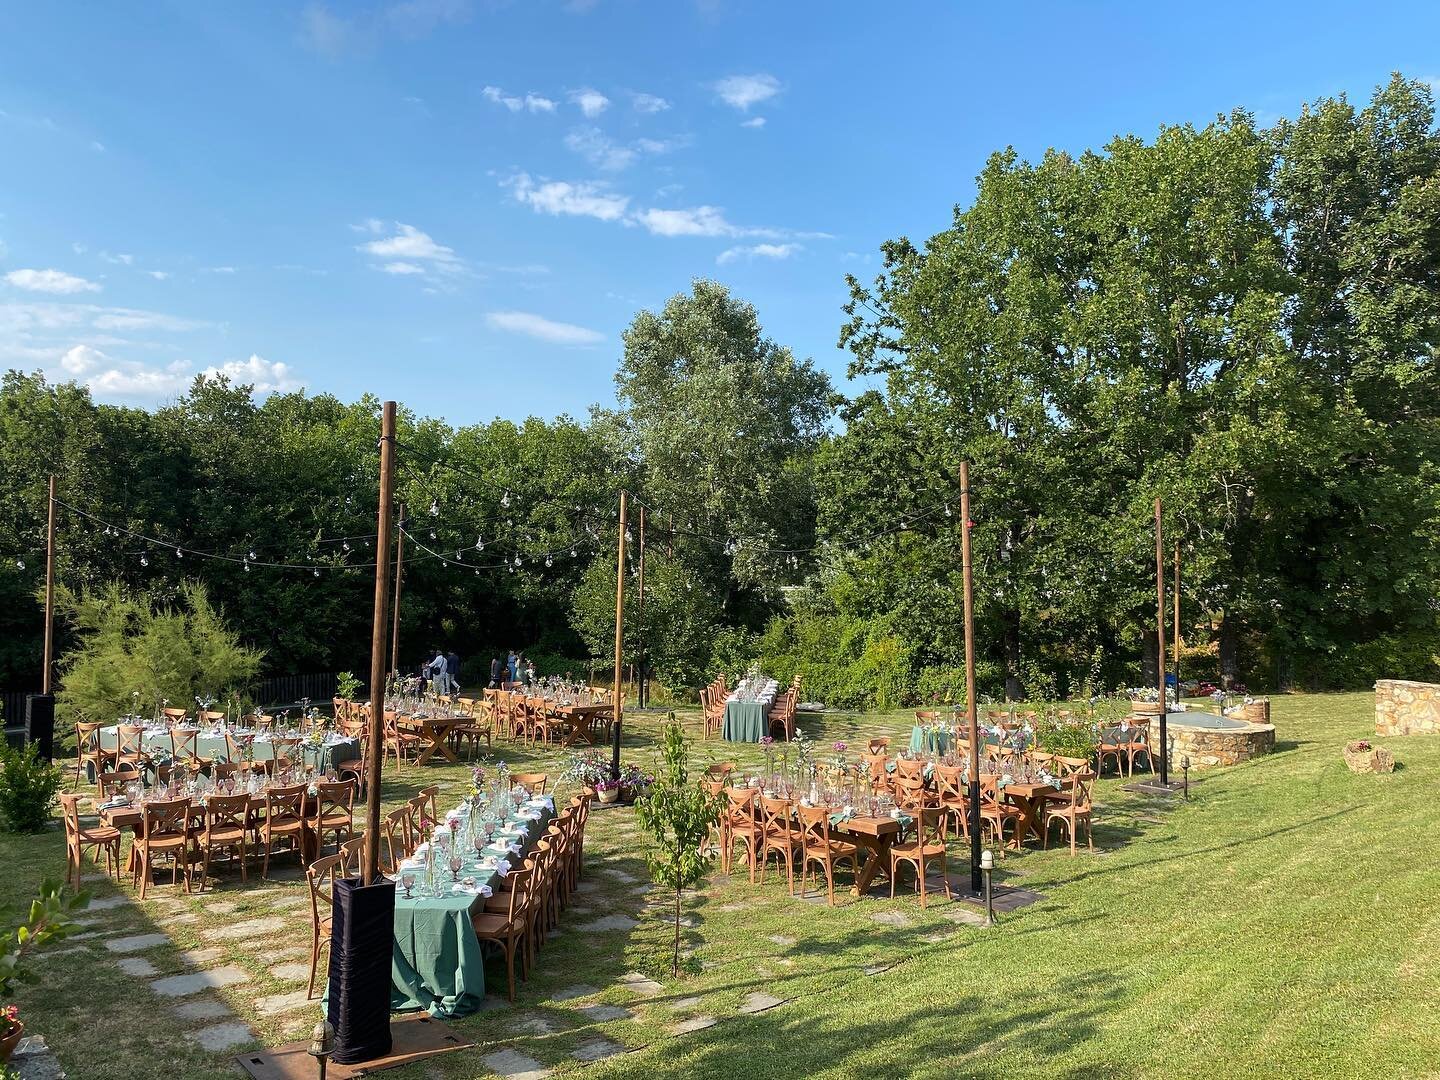 &bull; One from last year&rsquo;s excellent organized wedding🌳

📍For bookings link in bio!
.
.
.
🎪 @fondo_special_occasions 
.
.
.
#agramada #agramadatreehouse #xaniagramada #luxurytreehouse #uniqueplaces #luxuryevents #wedding #architecture #fore